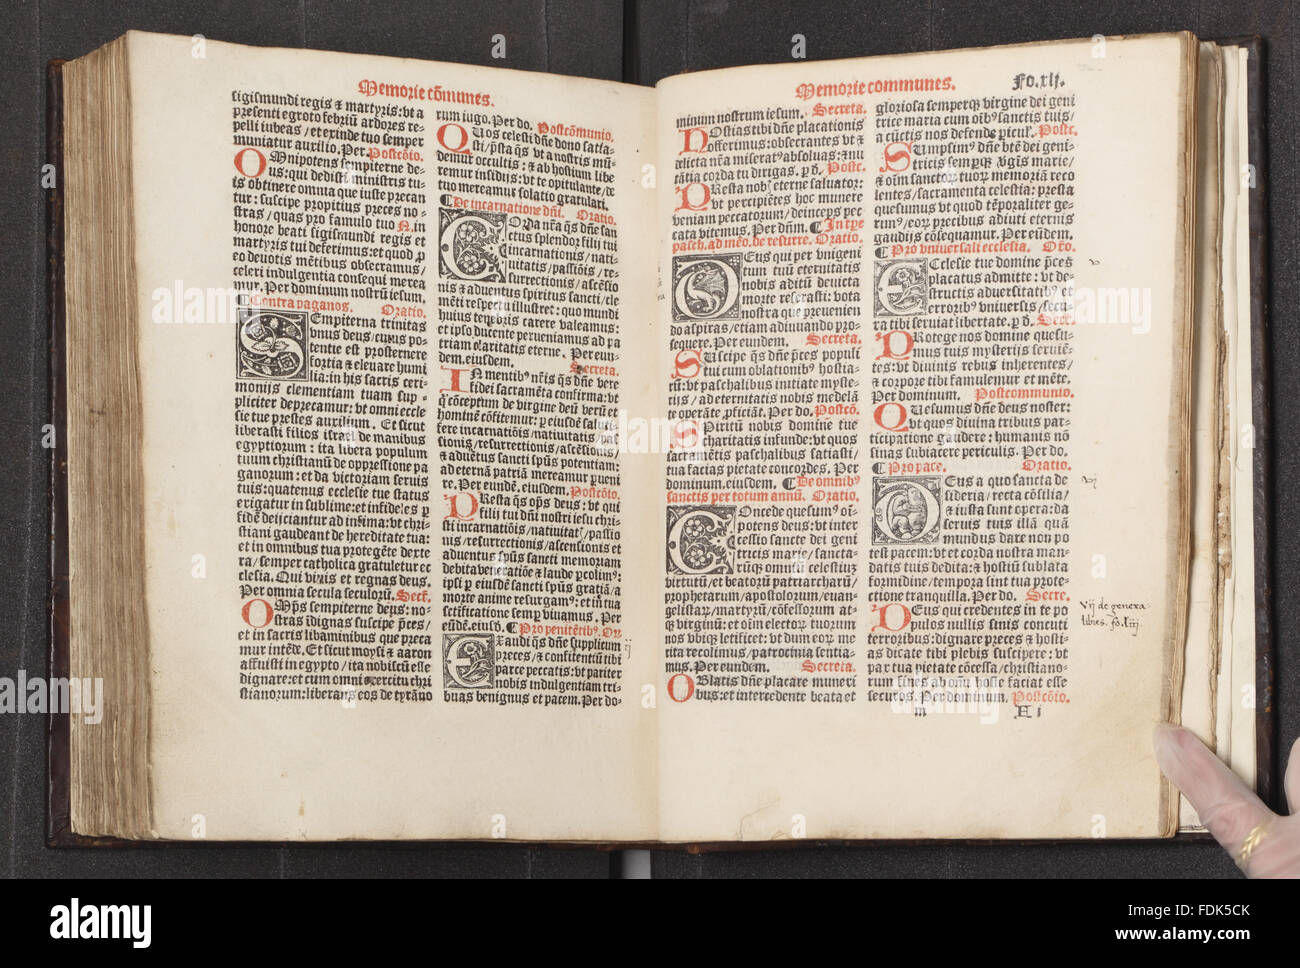 The only copy known to survive of this 1487 Missal, which has been at Lyme since at least the sixteenth century.It was printed in red & black by William Caxton: leaf G6v has probably the earliest occurrence of his famous device (cf. W. Blades, William Cax Stock Photo